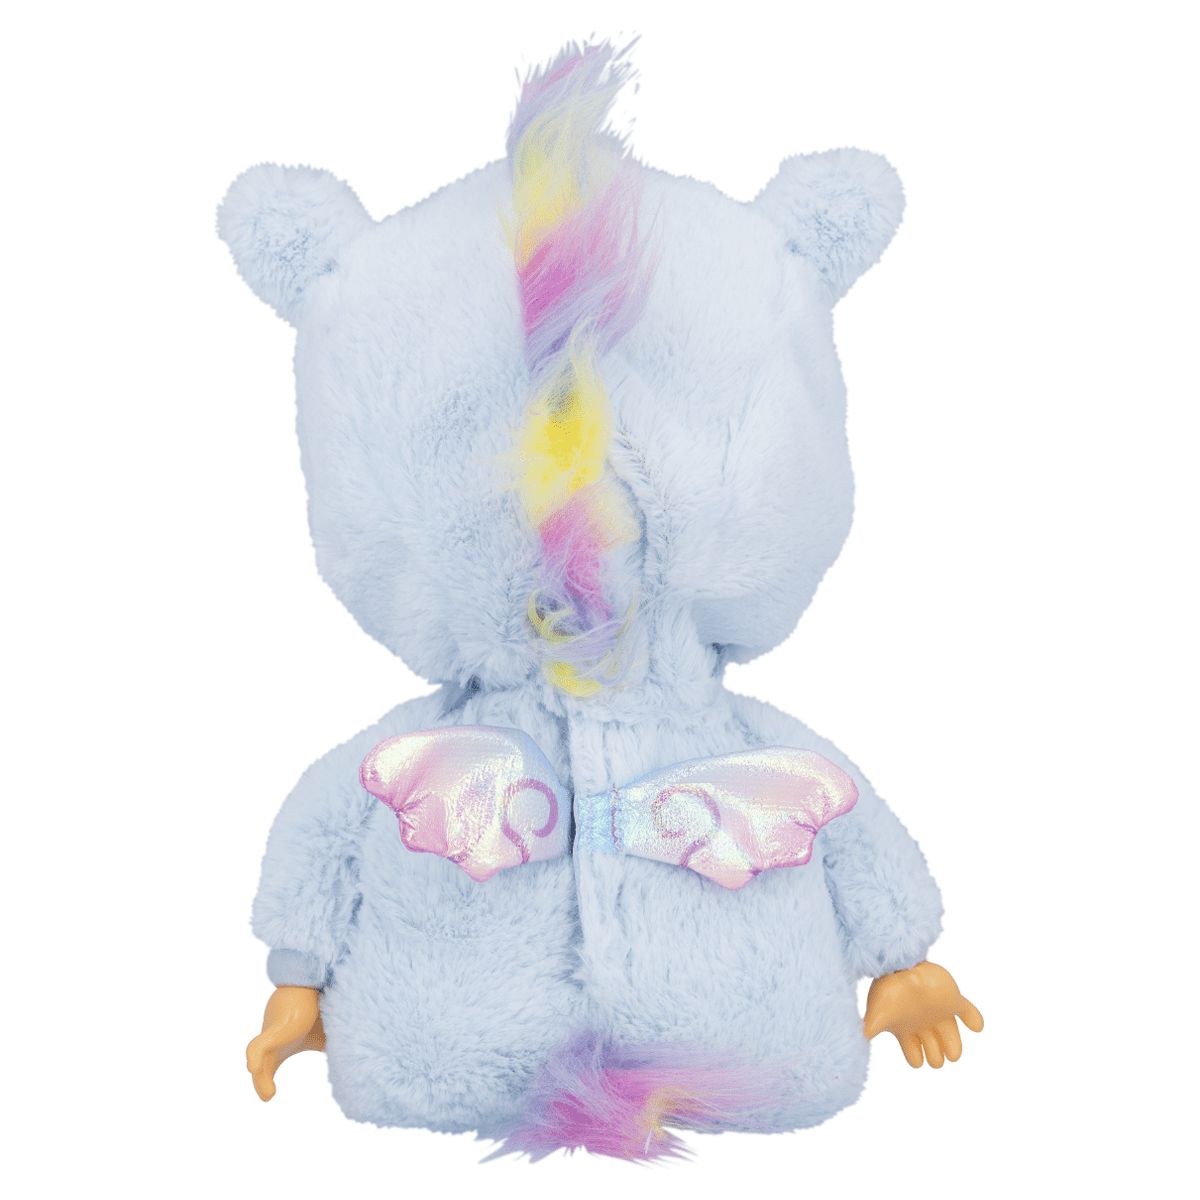 Cry Babies Goodnight Starry Sky Jenna 12 inch Doll with Starry Sky Projection! - image 2 of 10